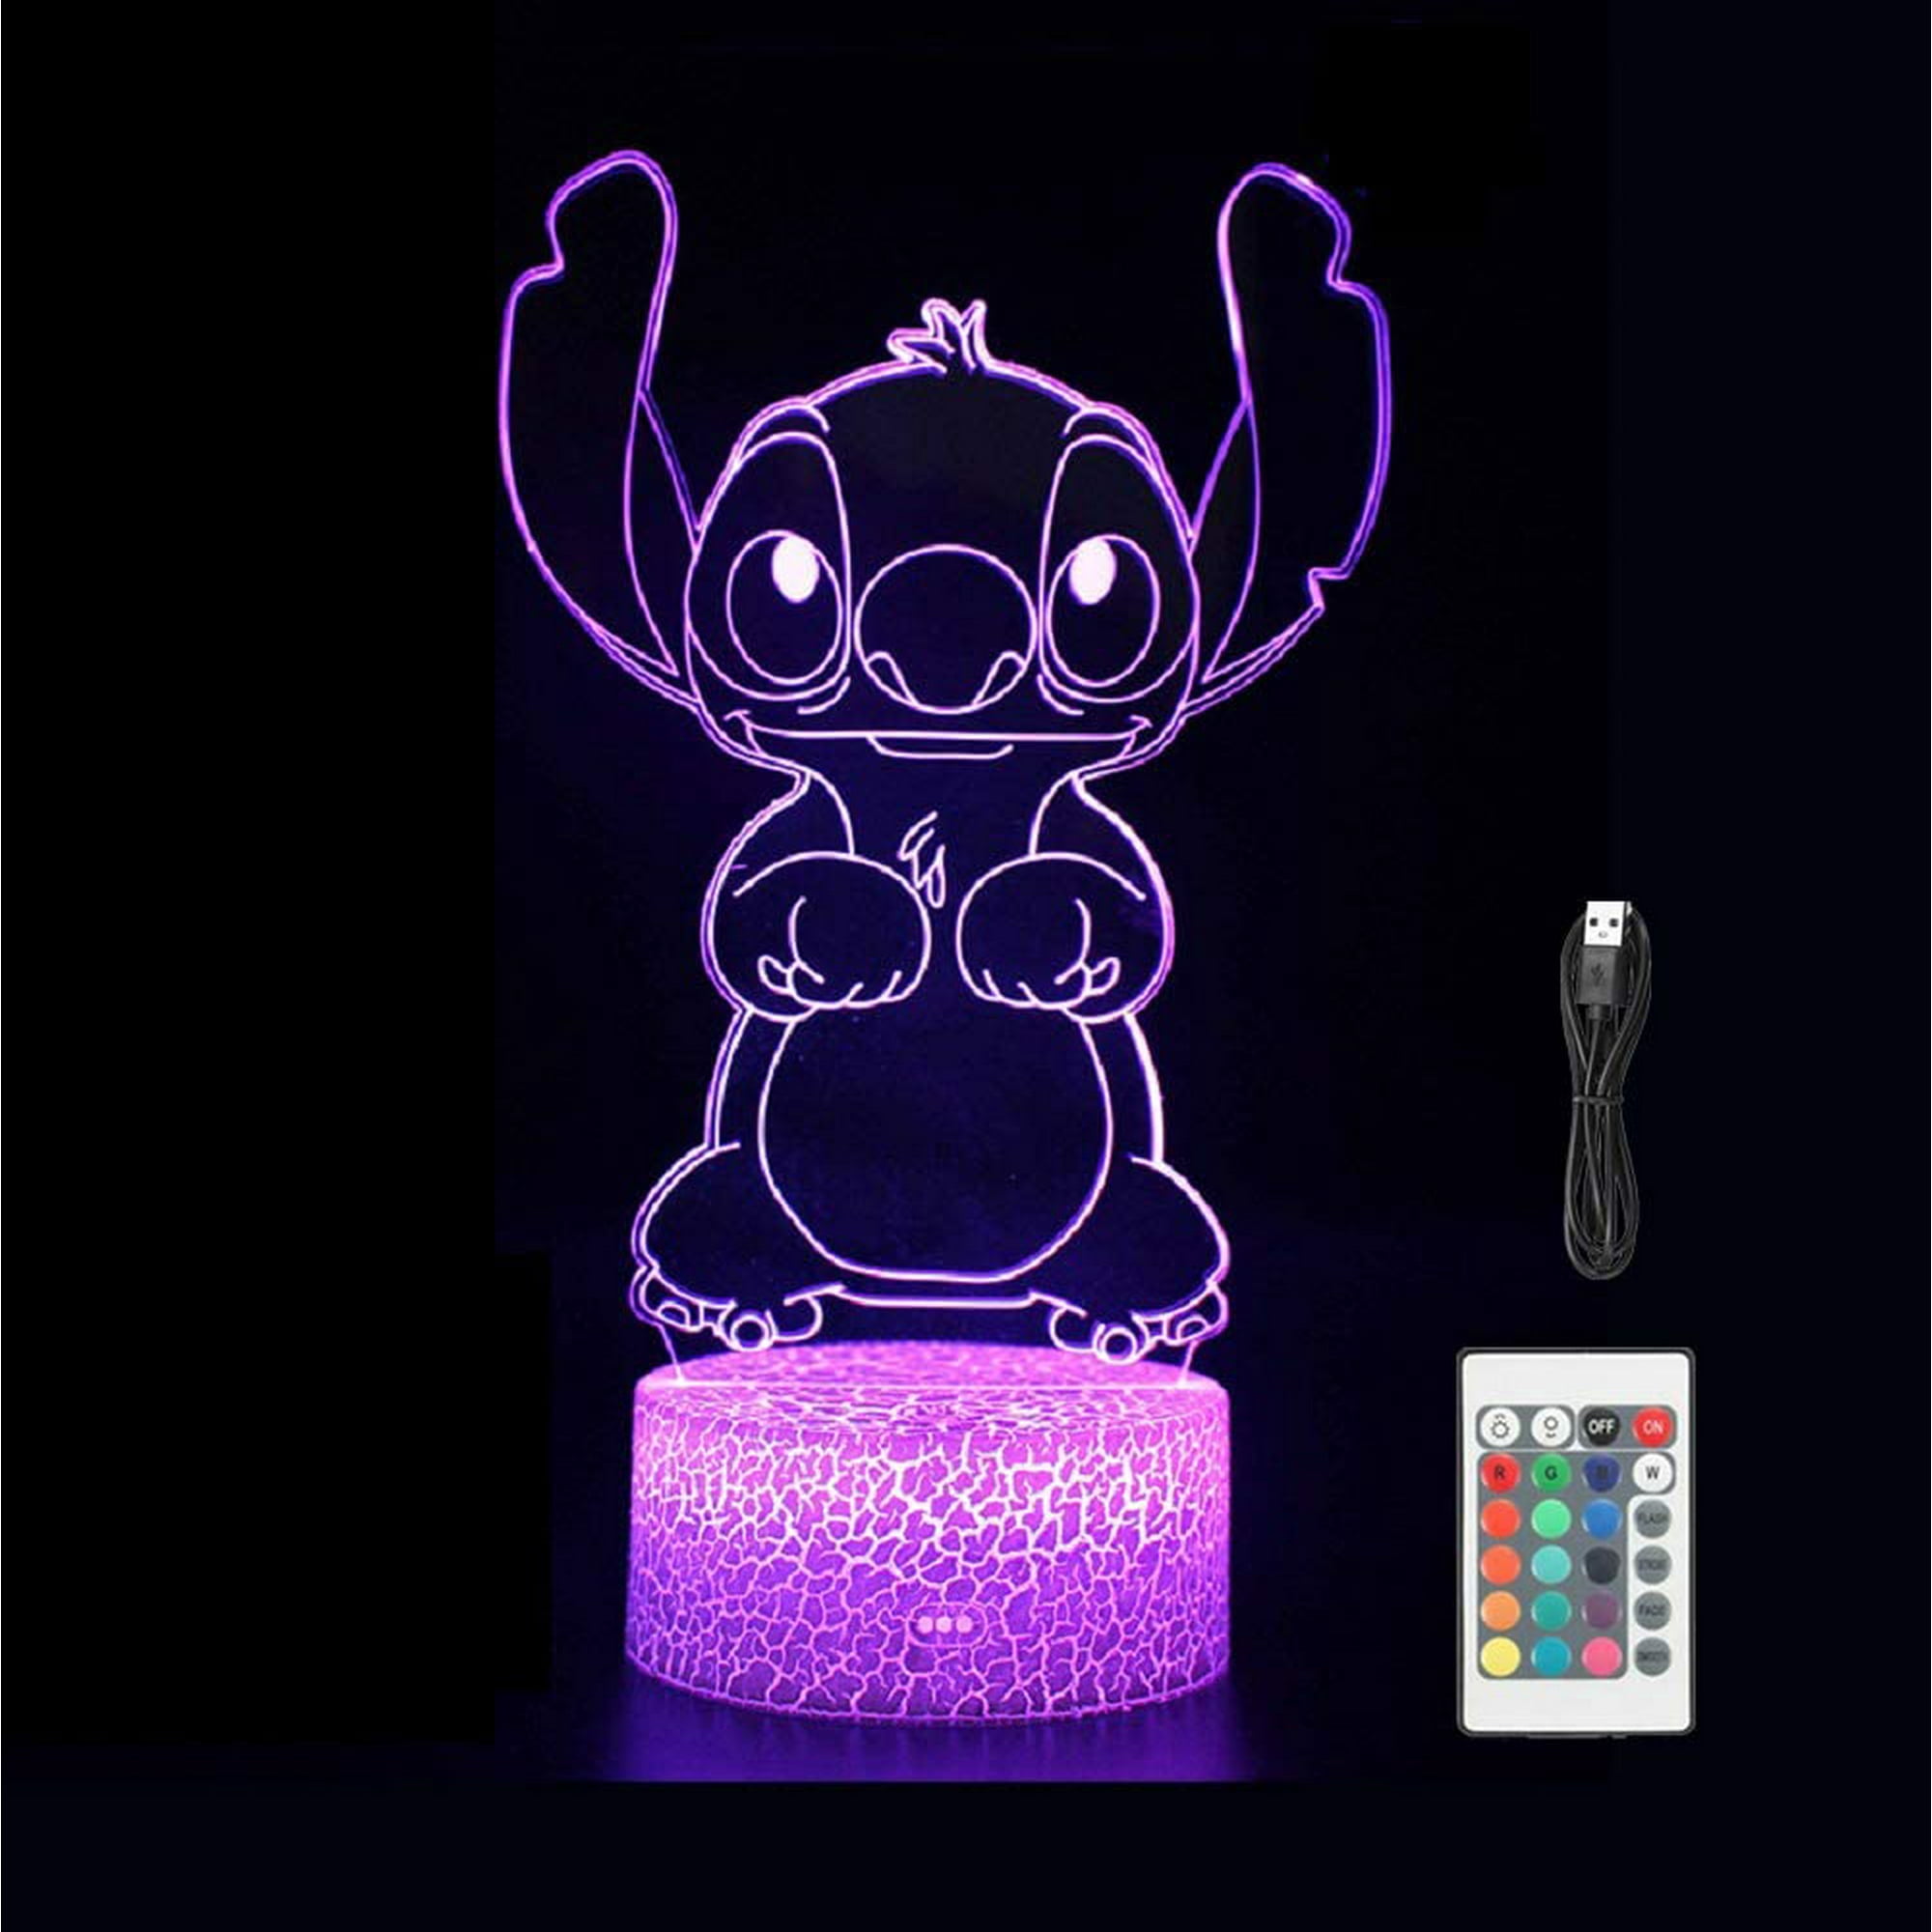 Qzbon Stitch Cute 3D Night Light,16 Colors Changing with Remote Control, Kids Room Decor Anime Lamp Birthday Christmas Gift for Boys Girls Teens Friends